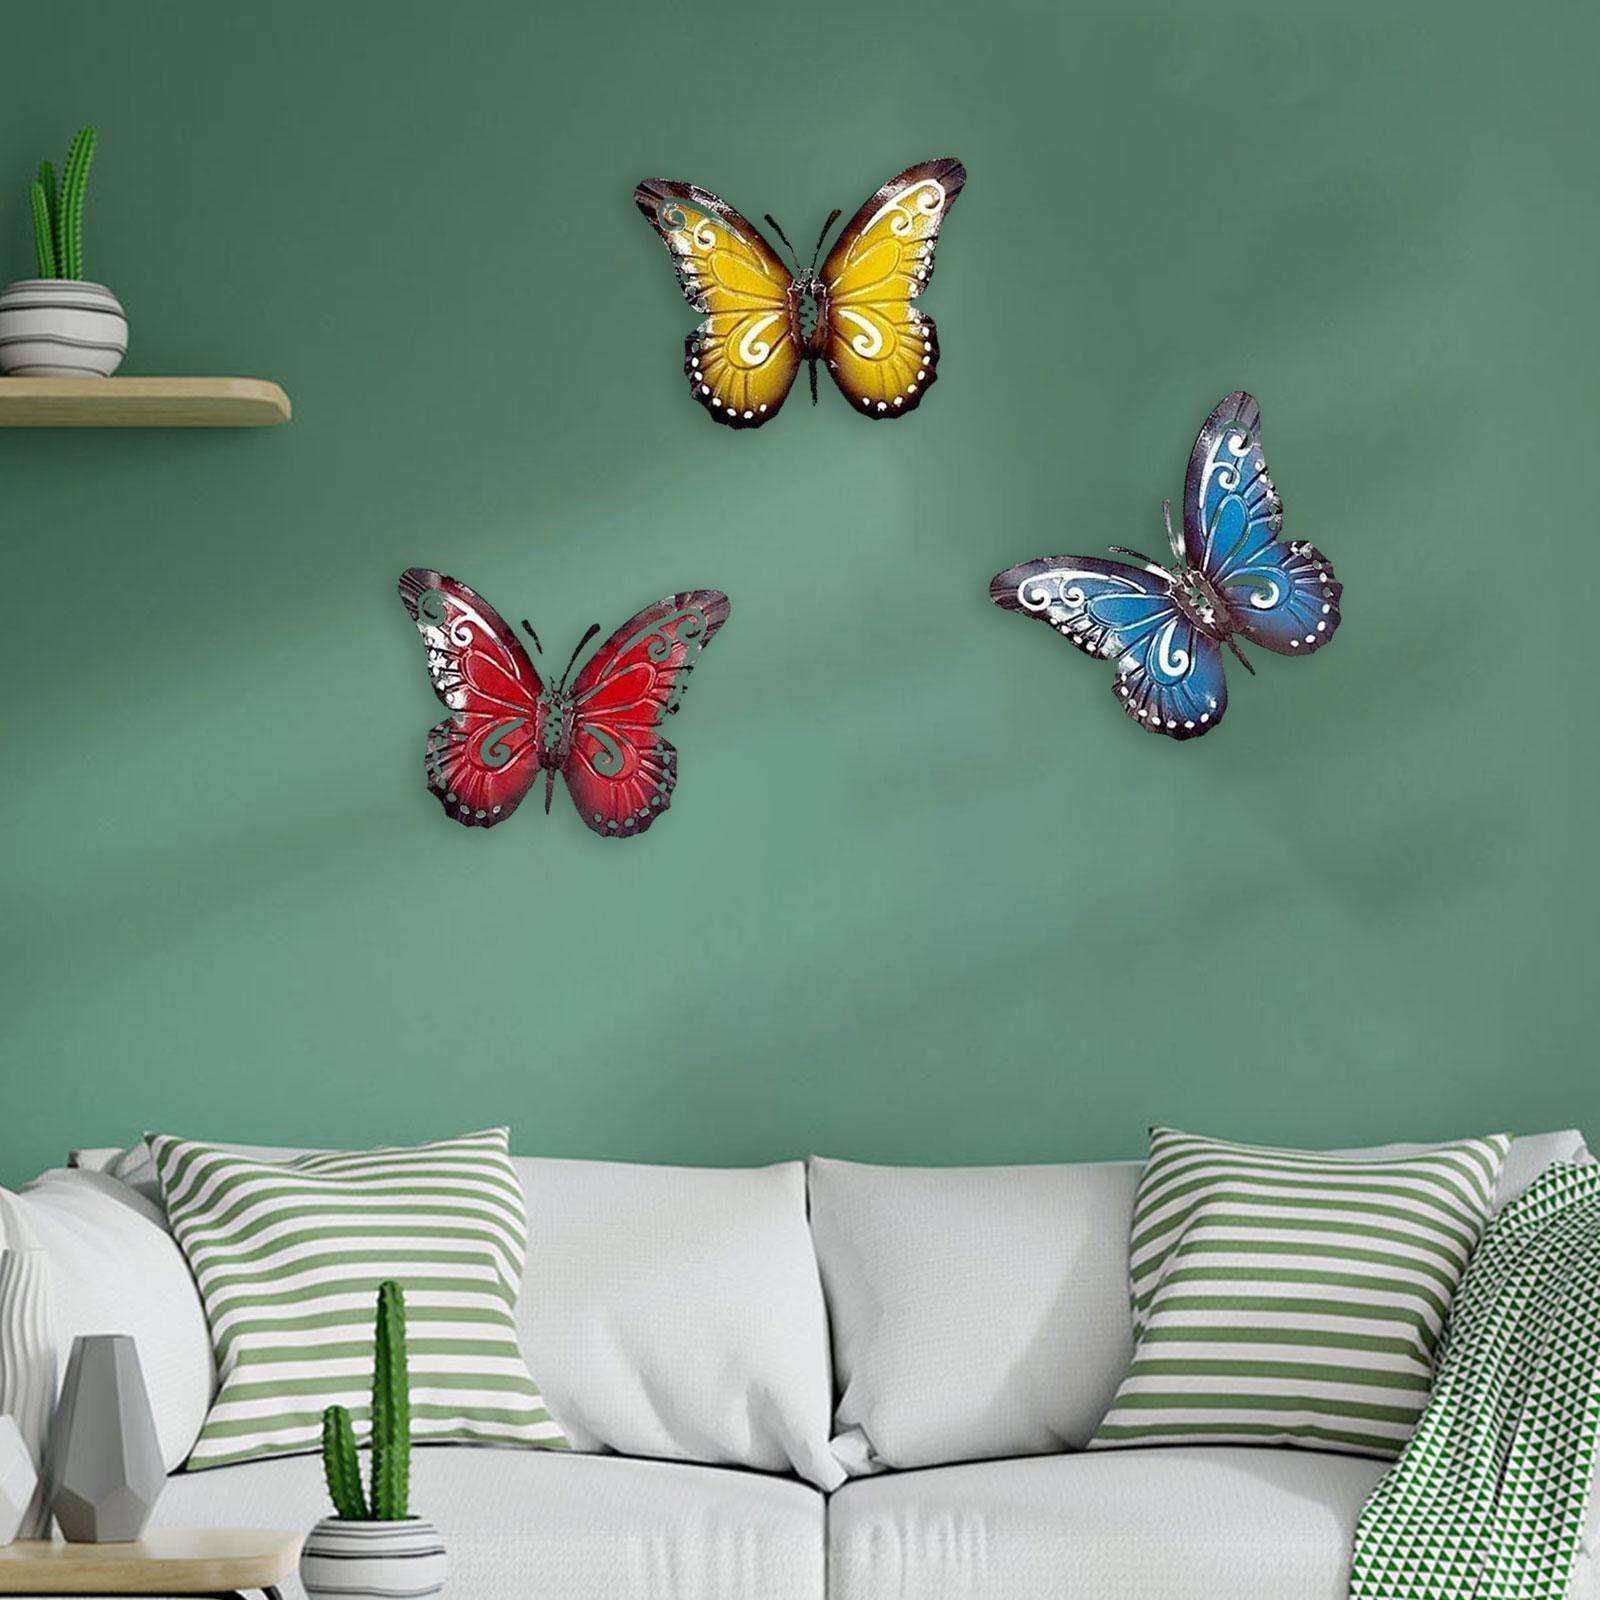 3x Modern Butterfly Wall Sculpture Decor Hanging for Home Porch Farmhouse